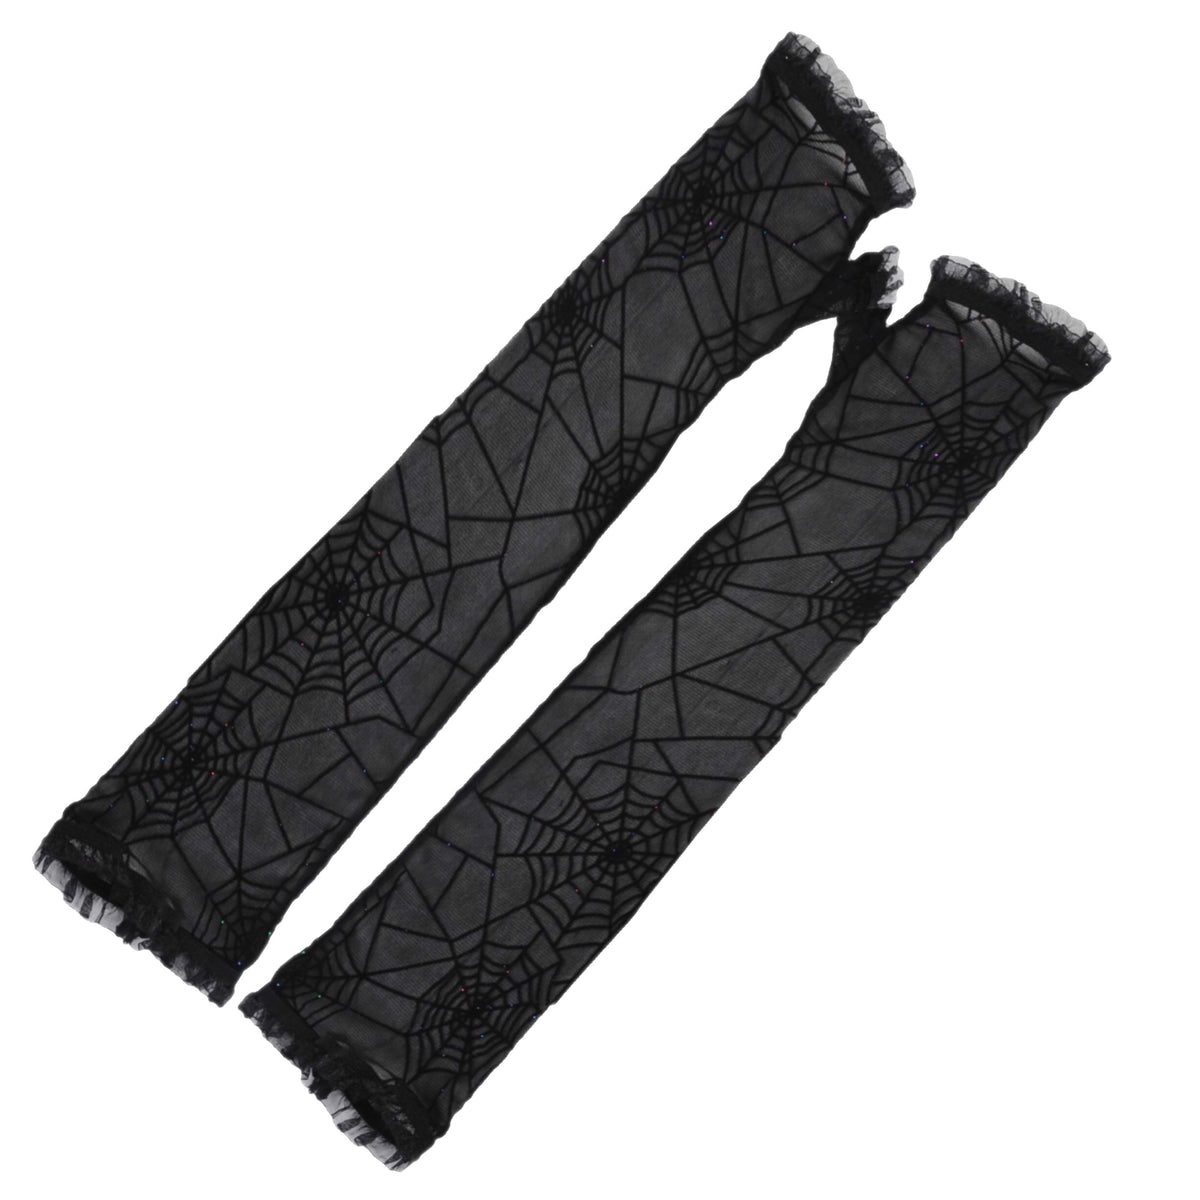 Rags n Rituals Black Spider Mesh Gloves at $14.99 USD